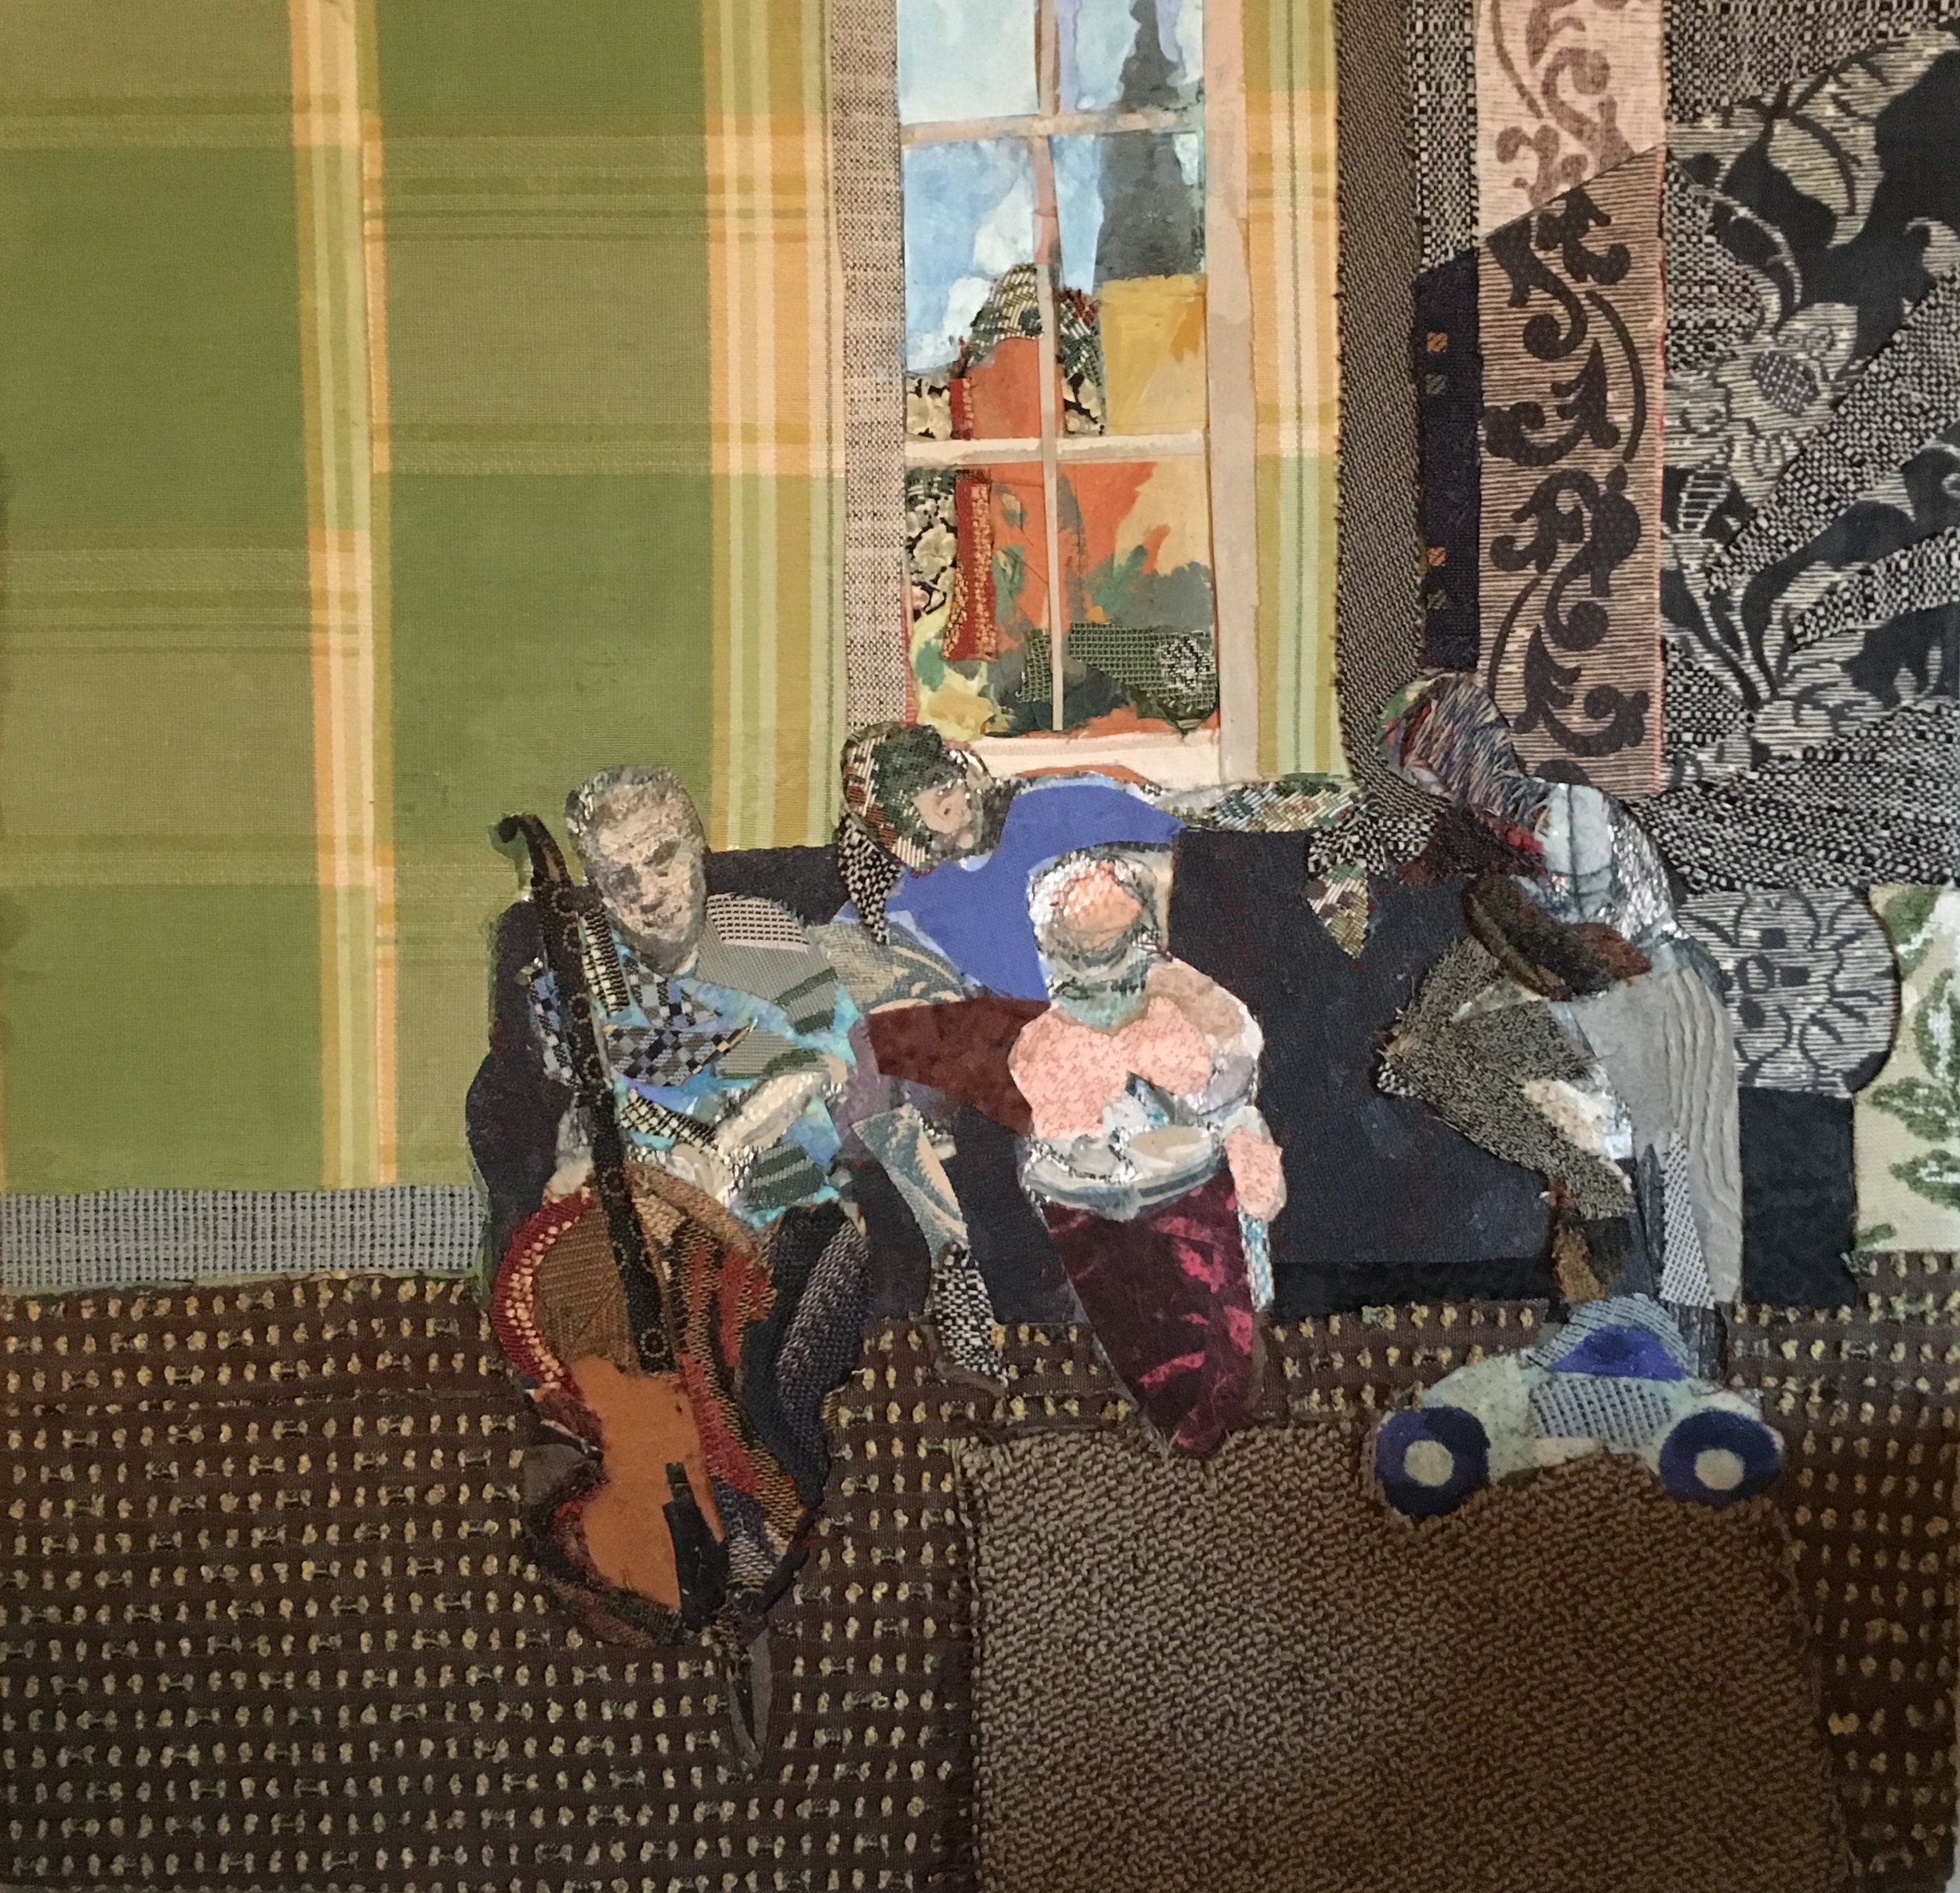   Homage to Vuillard (Family Group) , 2016, mixed media on canvas, 19 x 19.5 x 2.5 inches 